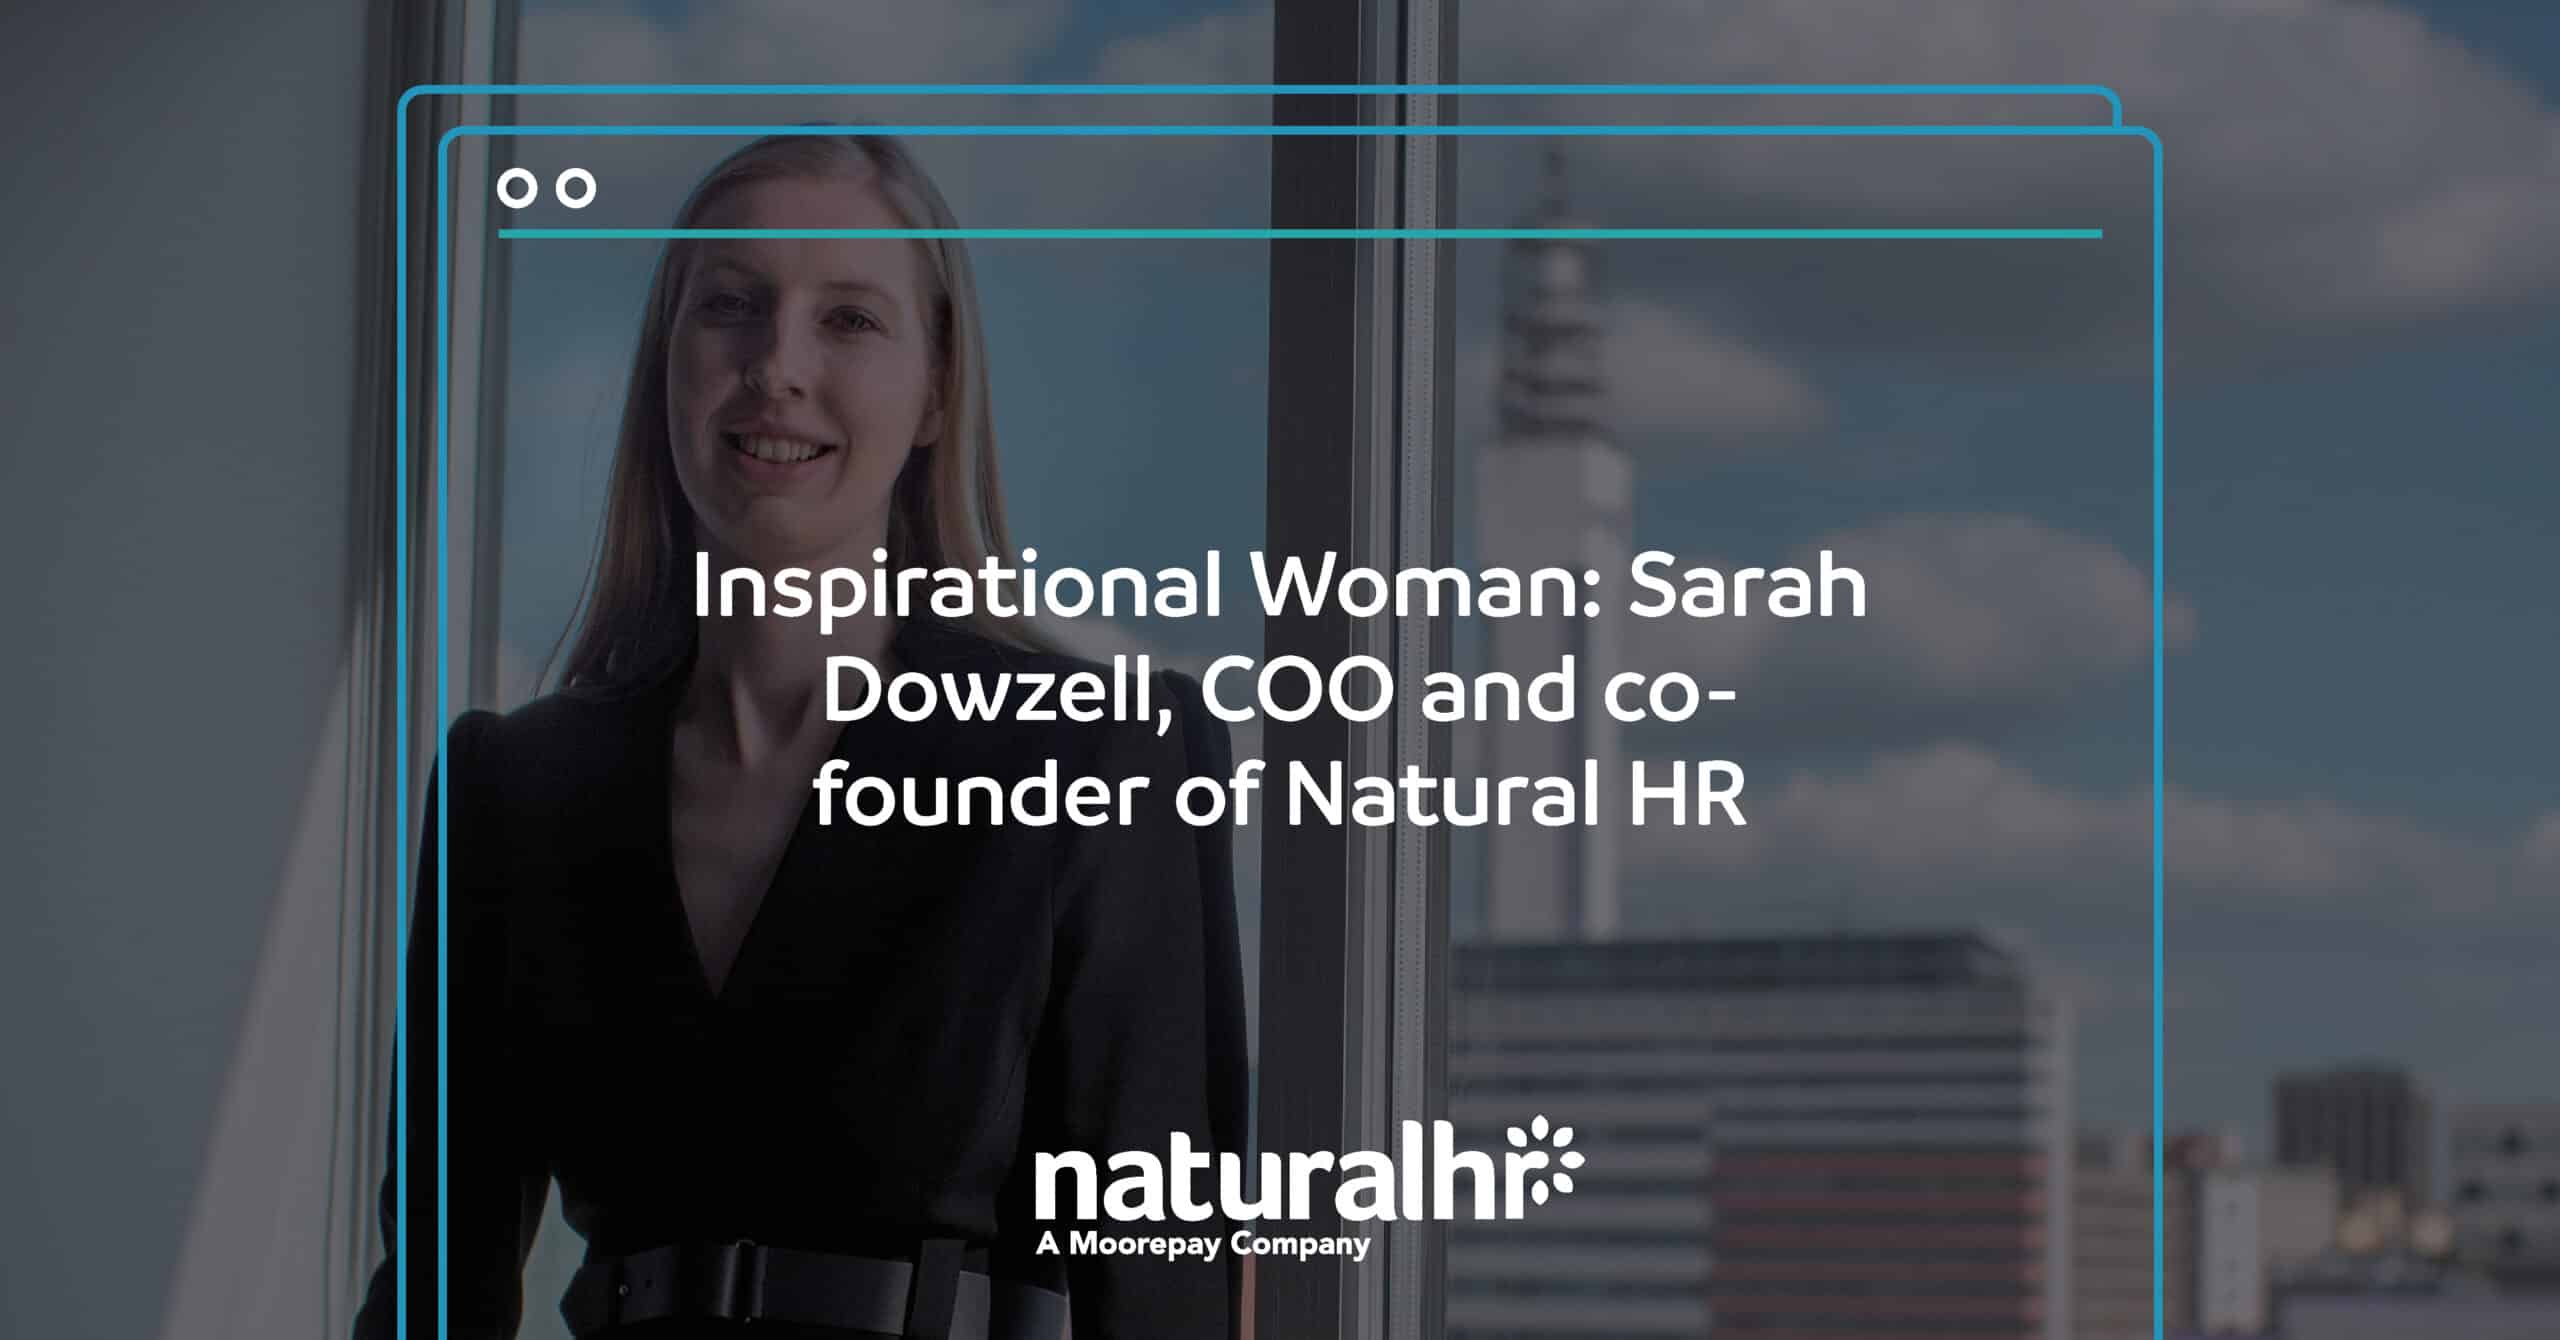 Inspirational Woman: Sarah Dowzell, COO and co-founder of Natural HR